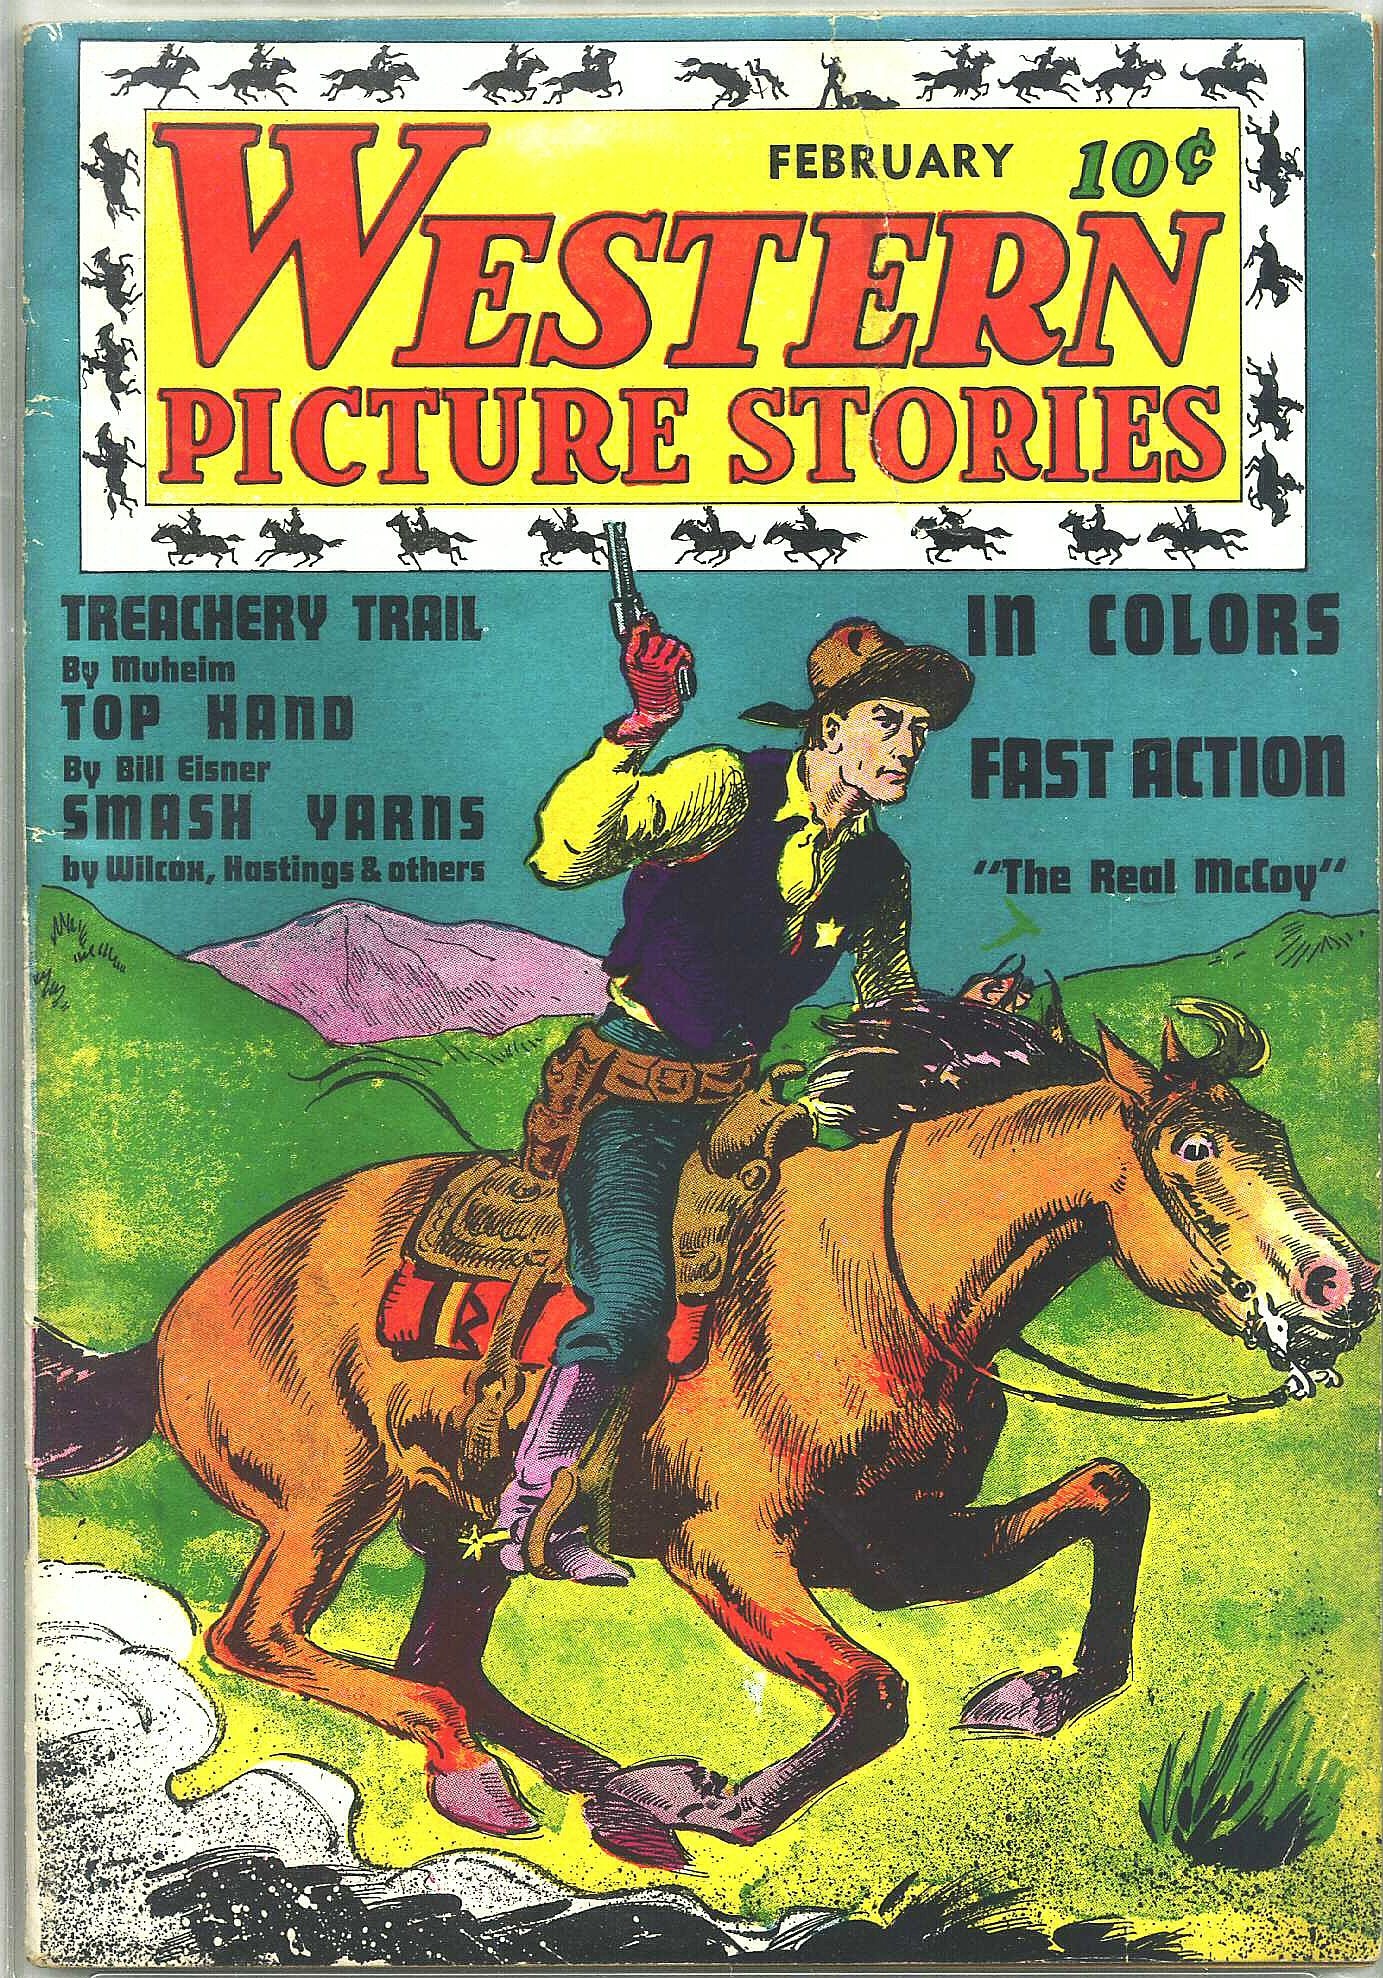 Read online Western Picture Stories comic -  Issue #1 - 1